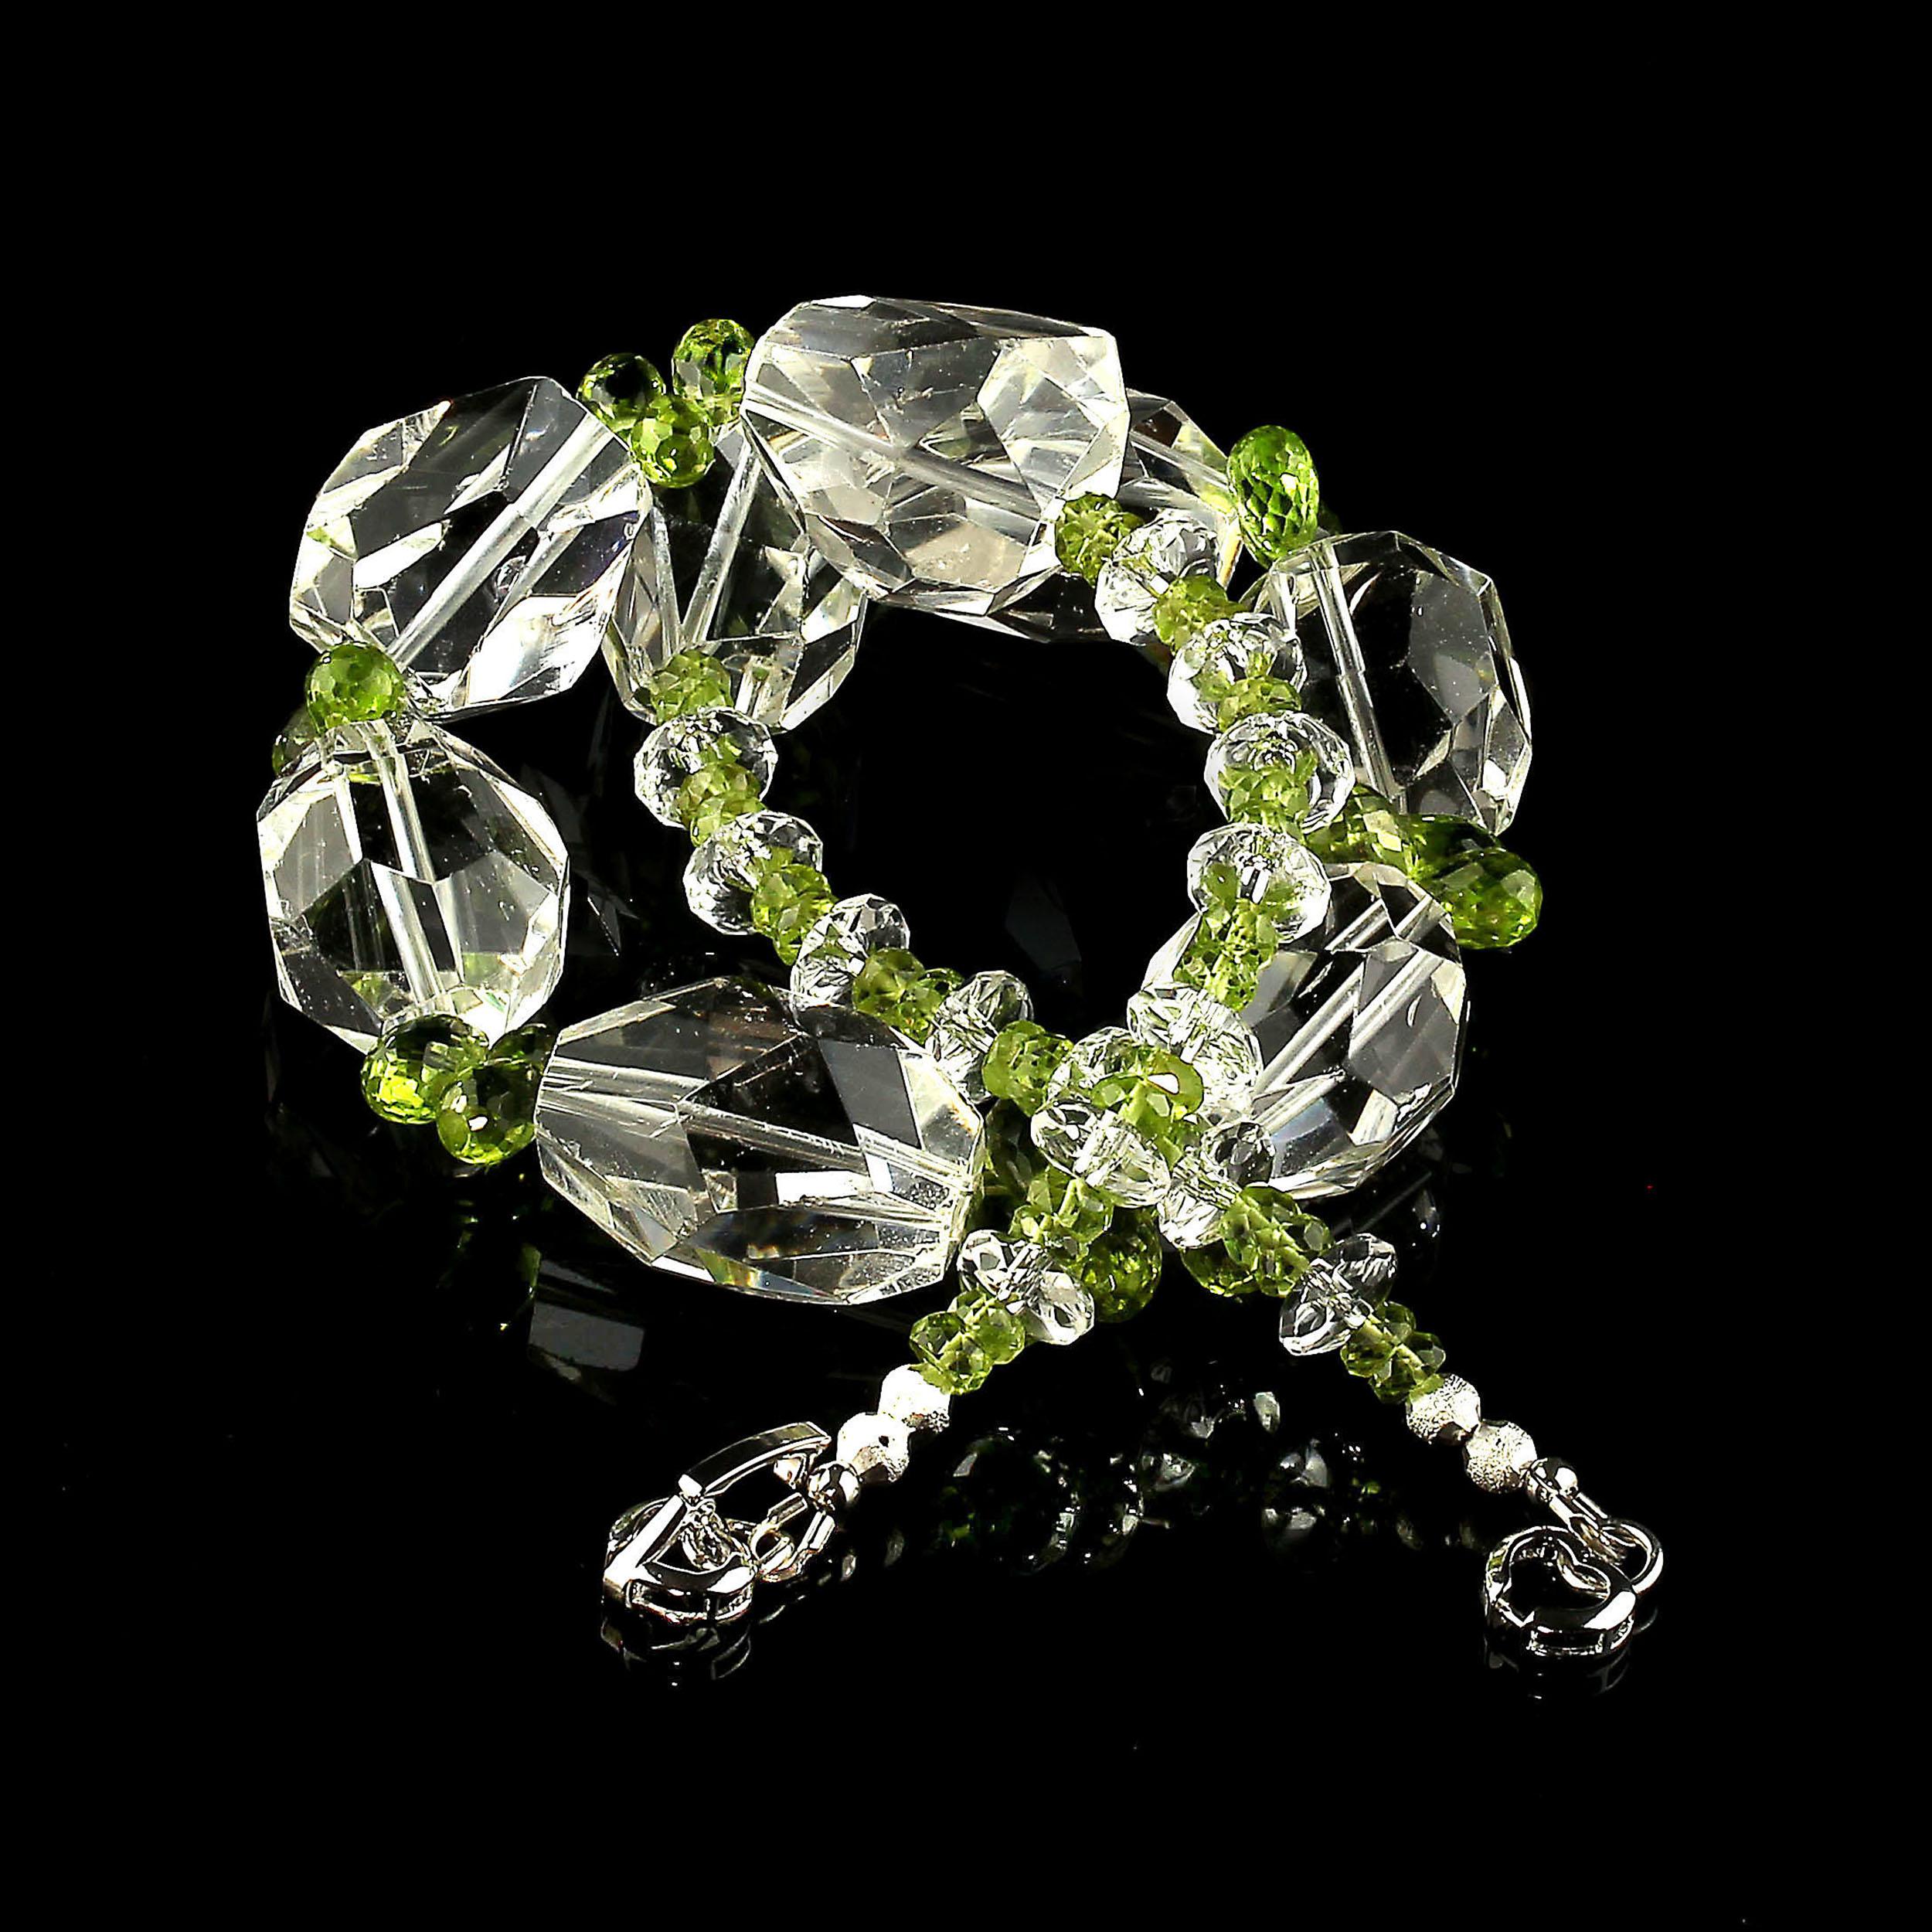 Women's or Men's AJD Sparkling Clear Quartz Crystal and Green Peridot Choker Necklace